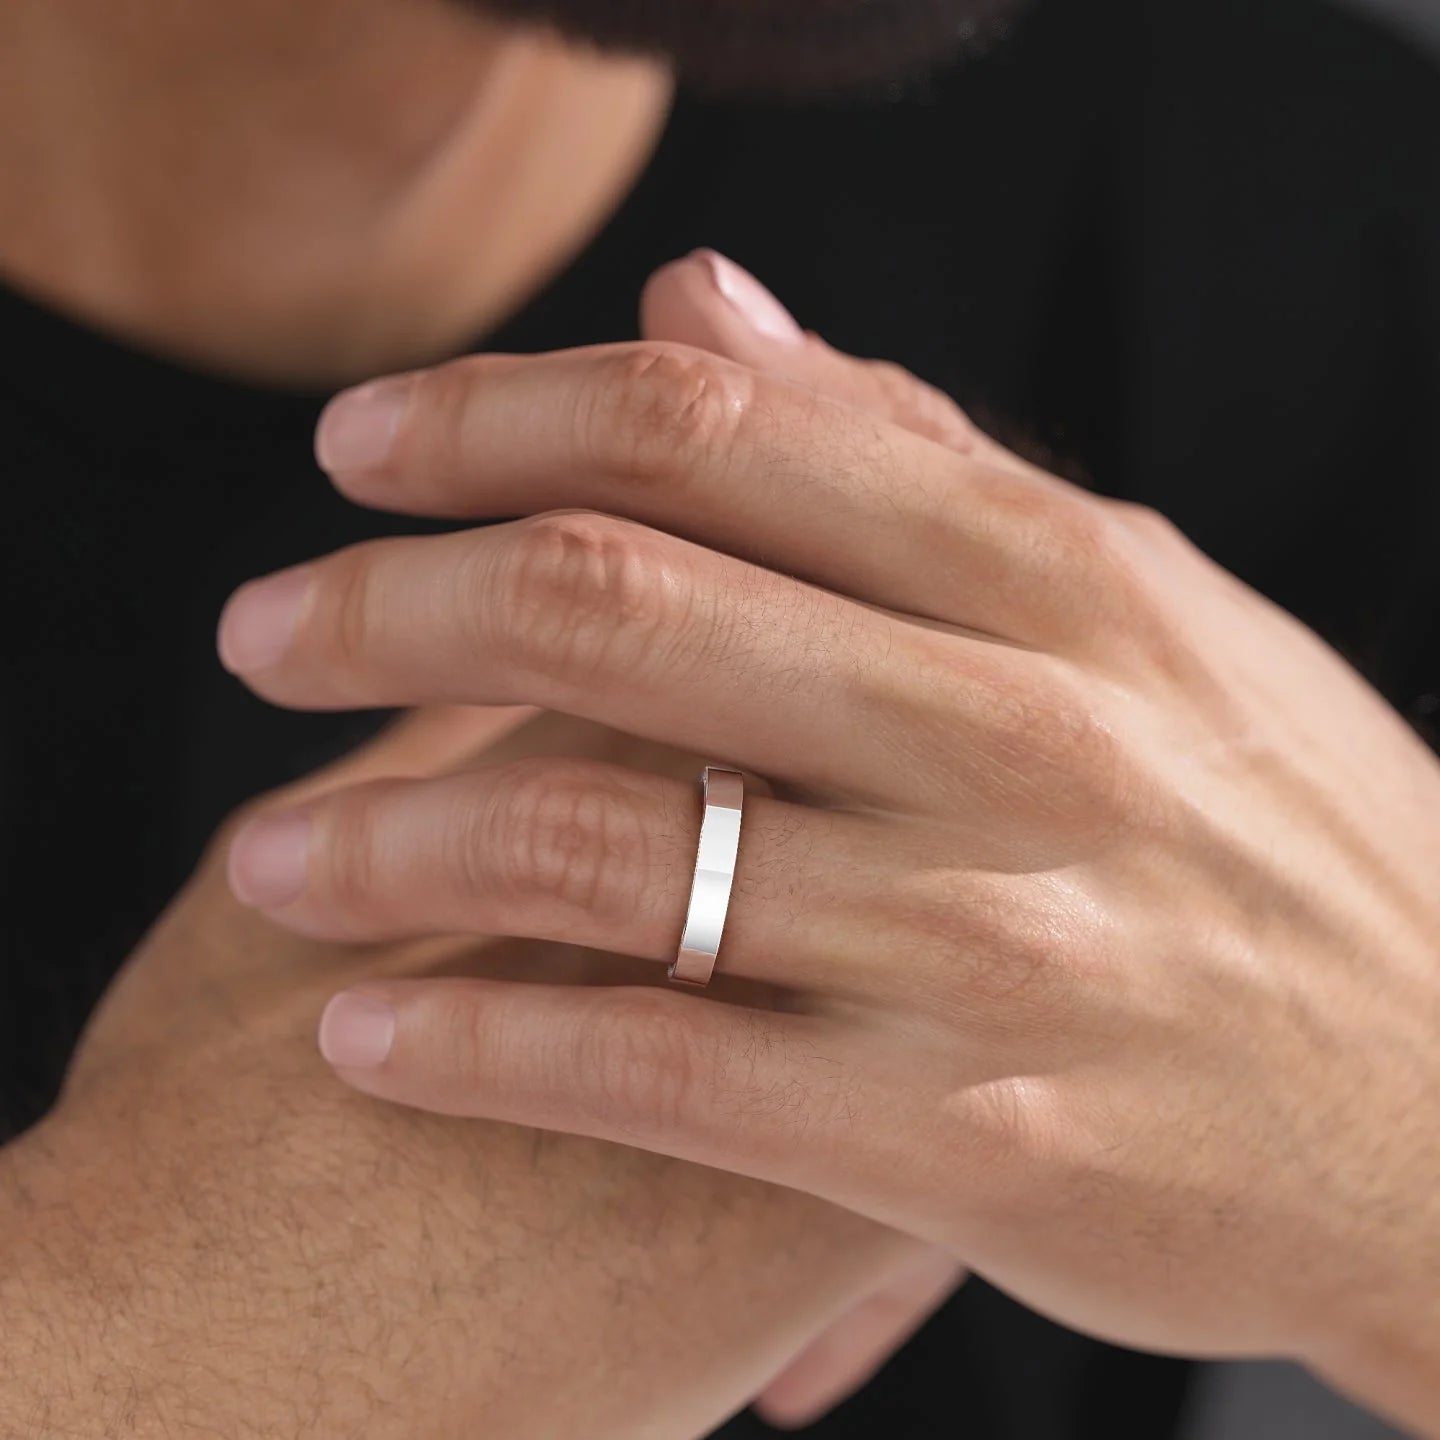 Is it weird/wrong to wear a ring on my left ring finger? Not engaged/married.  | Weddings, Etiquette and Advice | Wedding Forums | WeddingWire